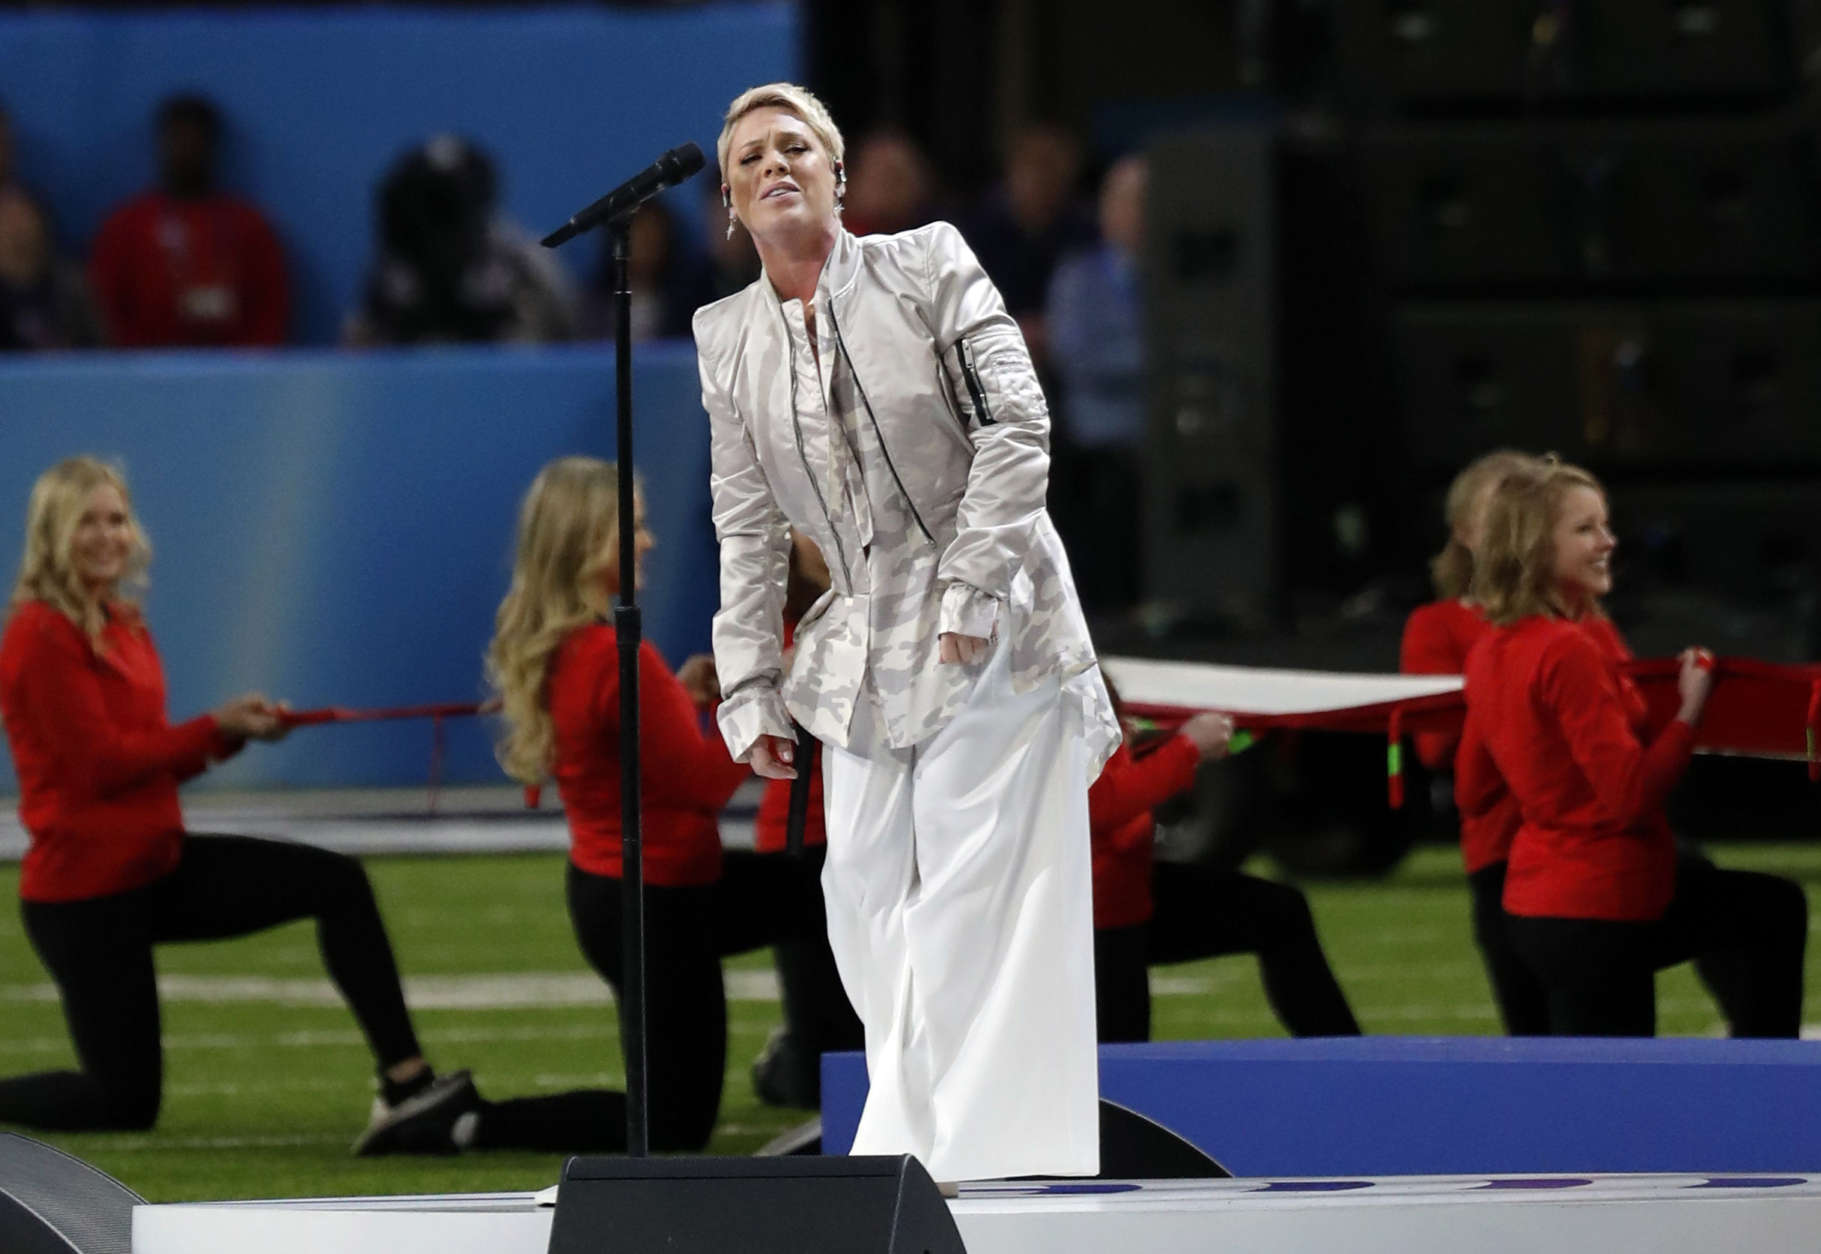 Pink performs the National Anthem, before the NFL Super Bowl 52 football game between the Philadelphia Eagles and the New England Patriots, Sunday, Feb. 4, 2018, in Minneapolis. (AP Photo/Tony Gutierrez)